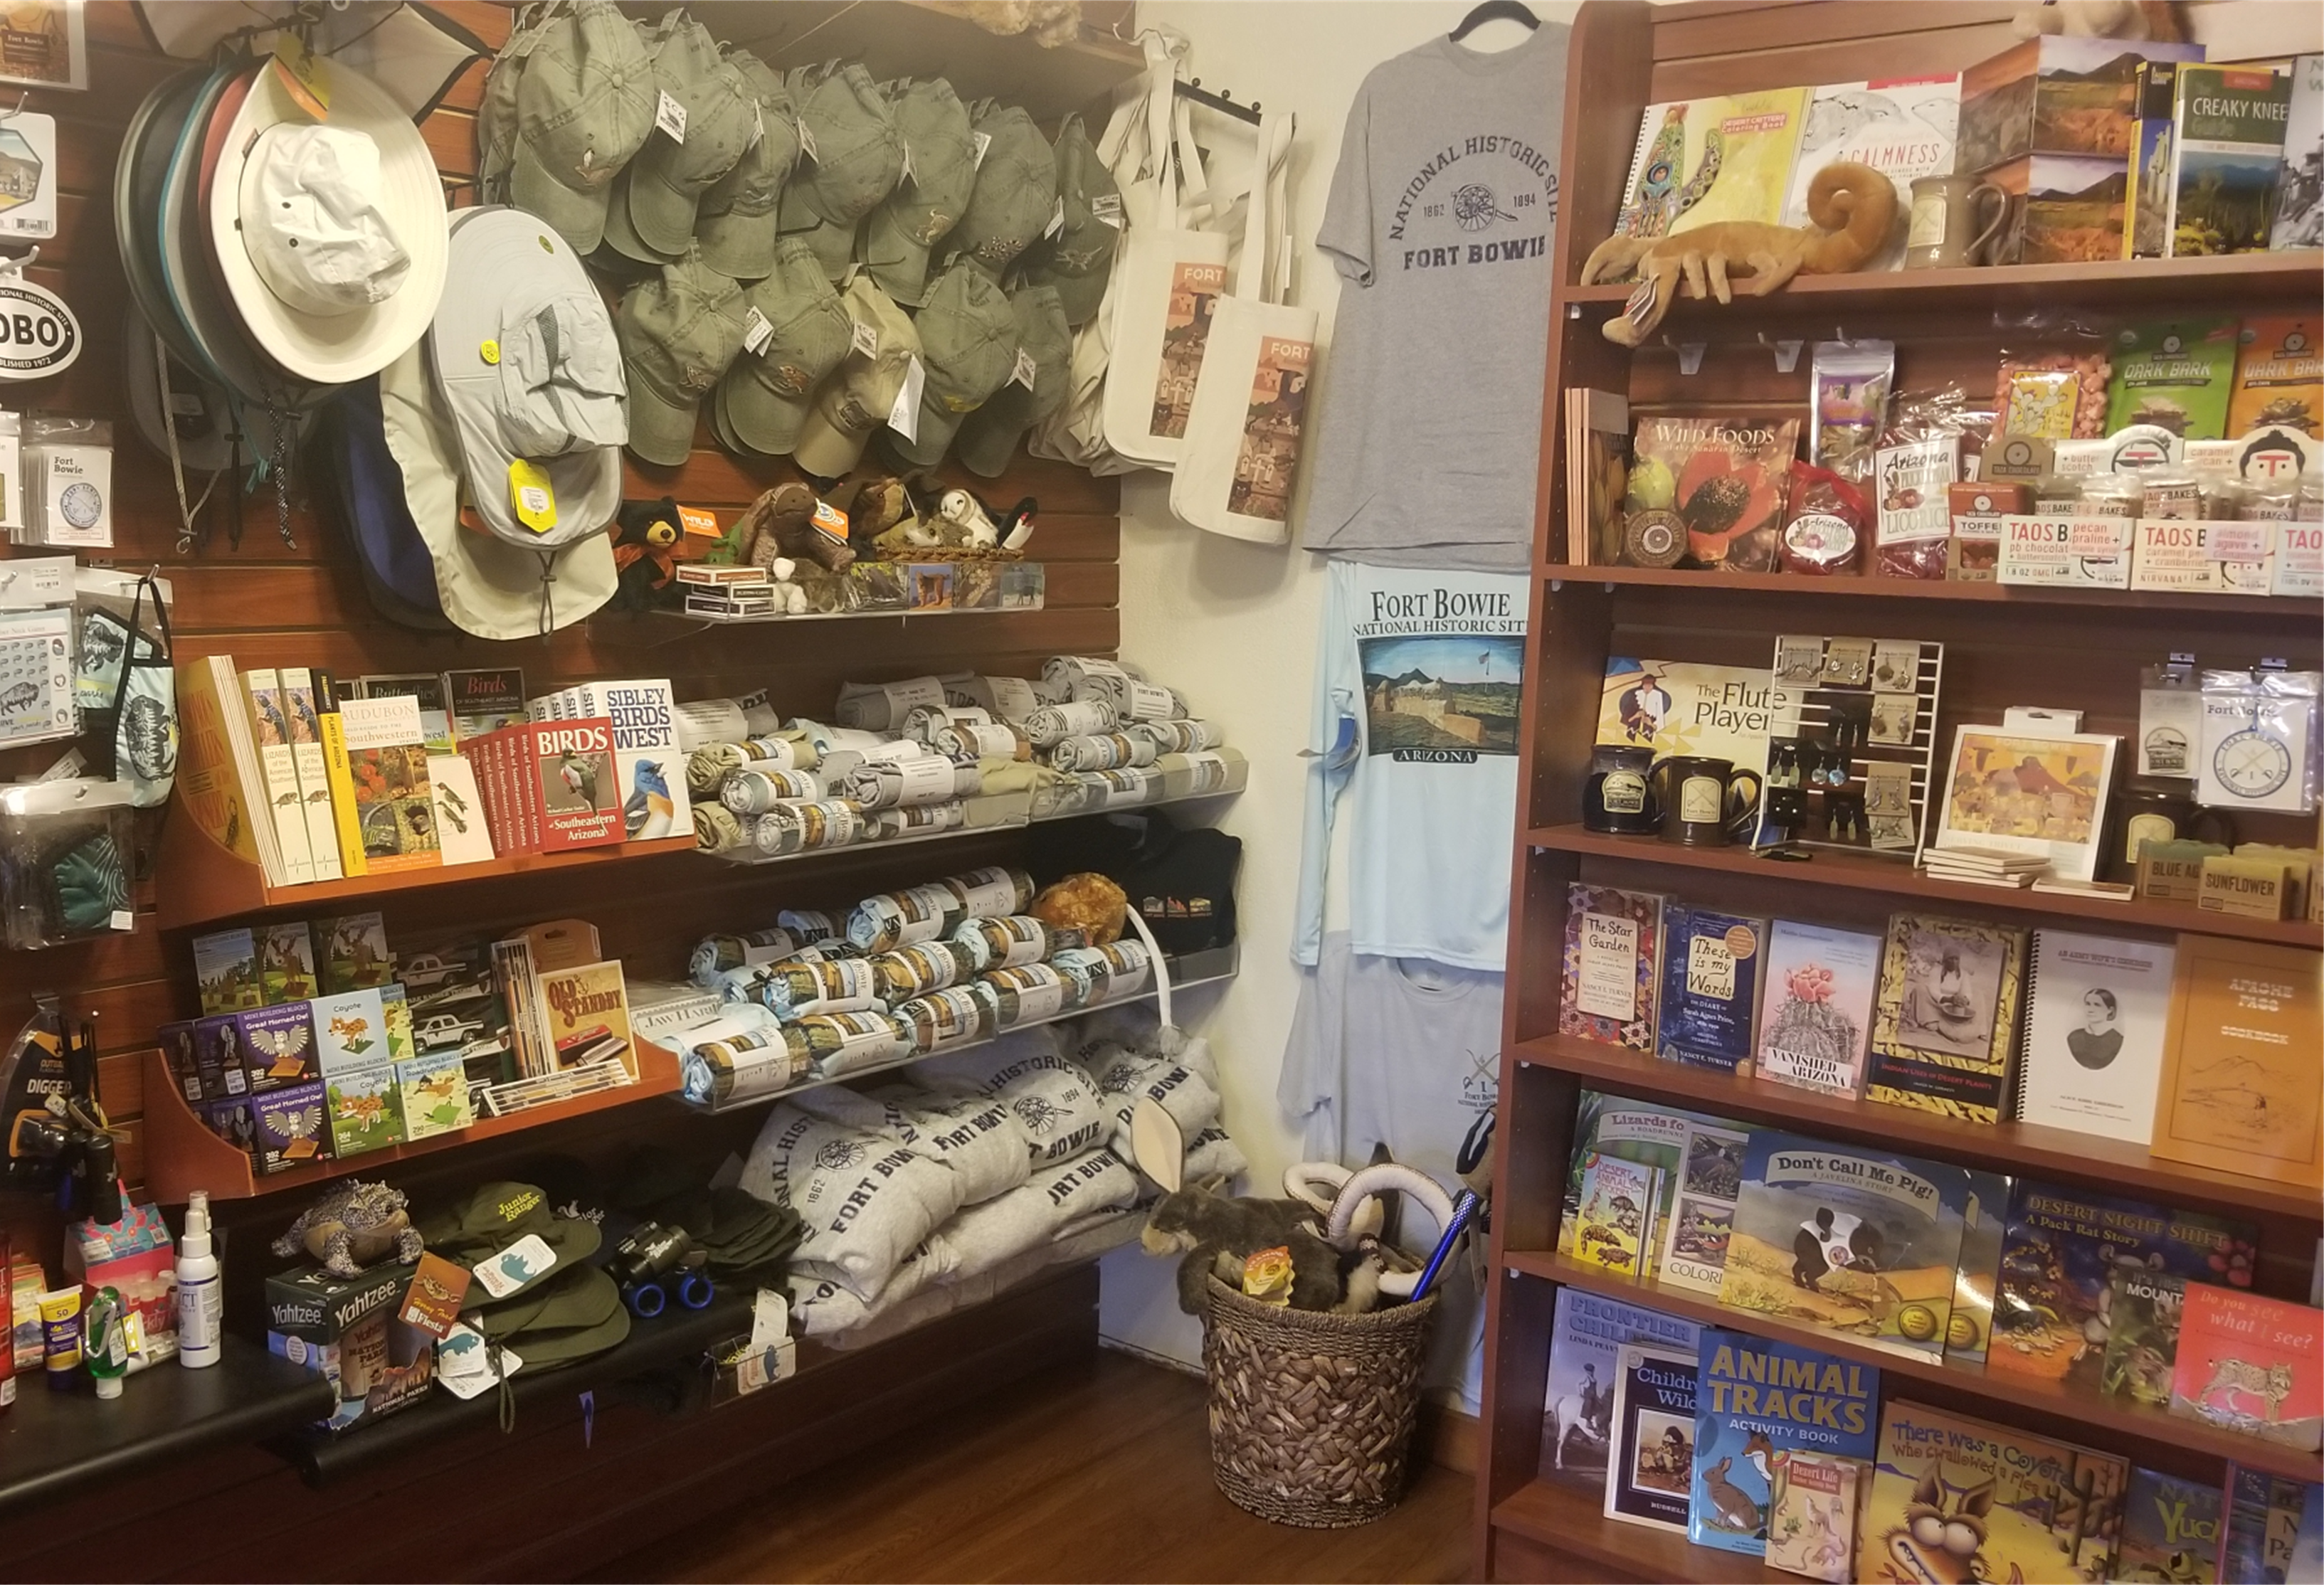 Books, shirts, and other store items are displayed on shelves.